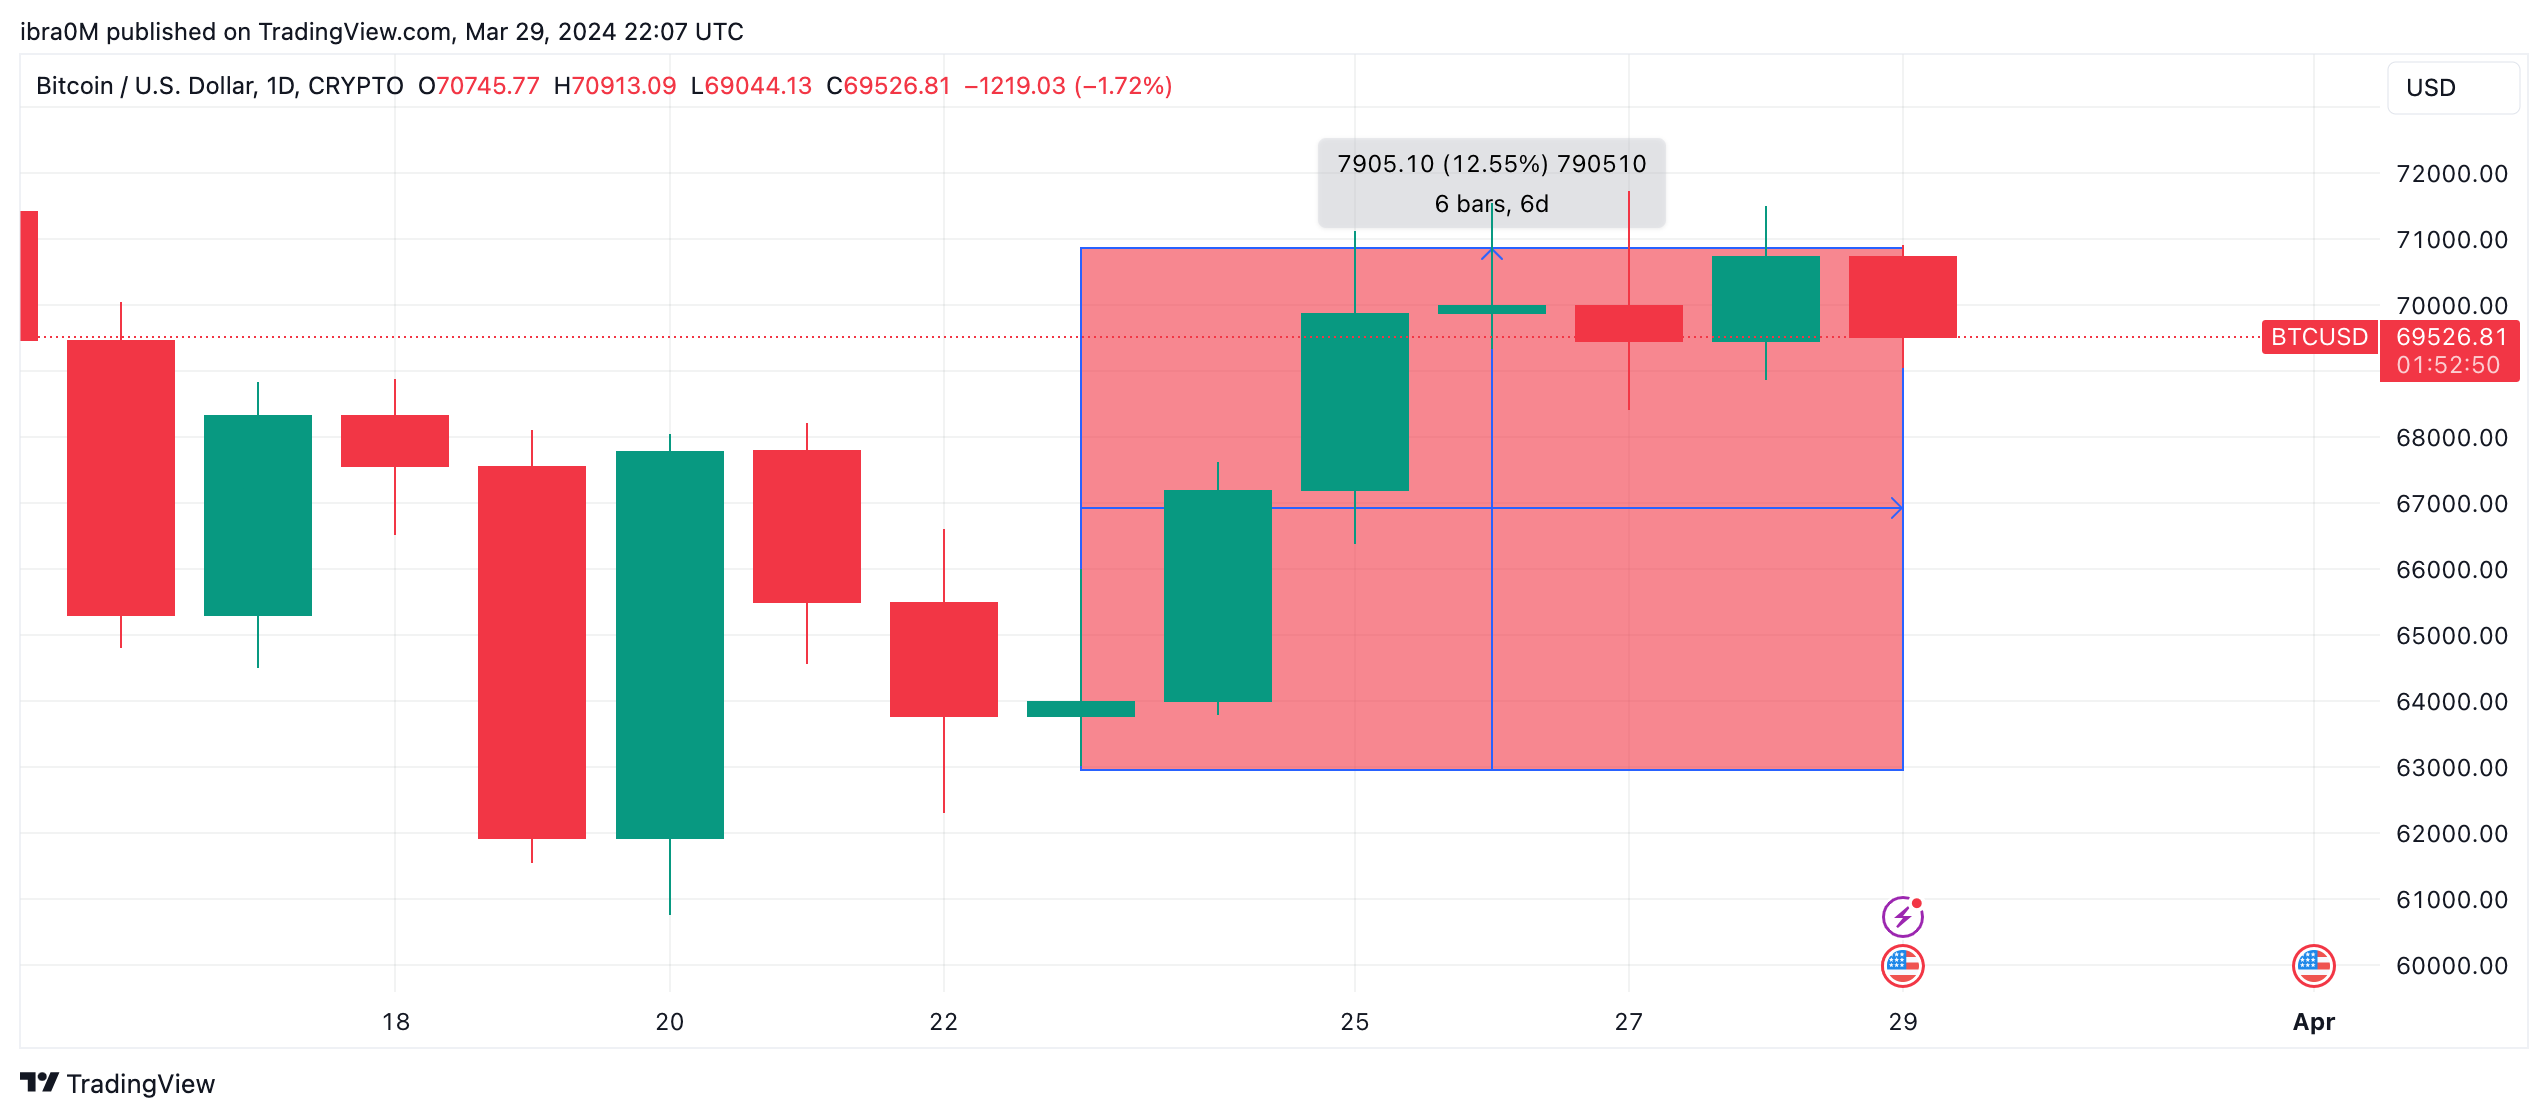 Bitcoin (BTC) price action | March 23 - March 29 2024 | Source: TradingView